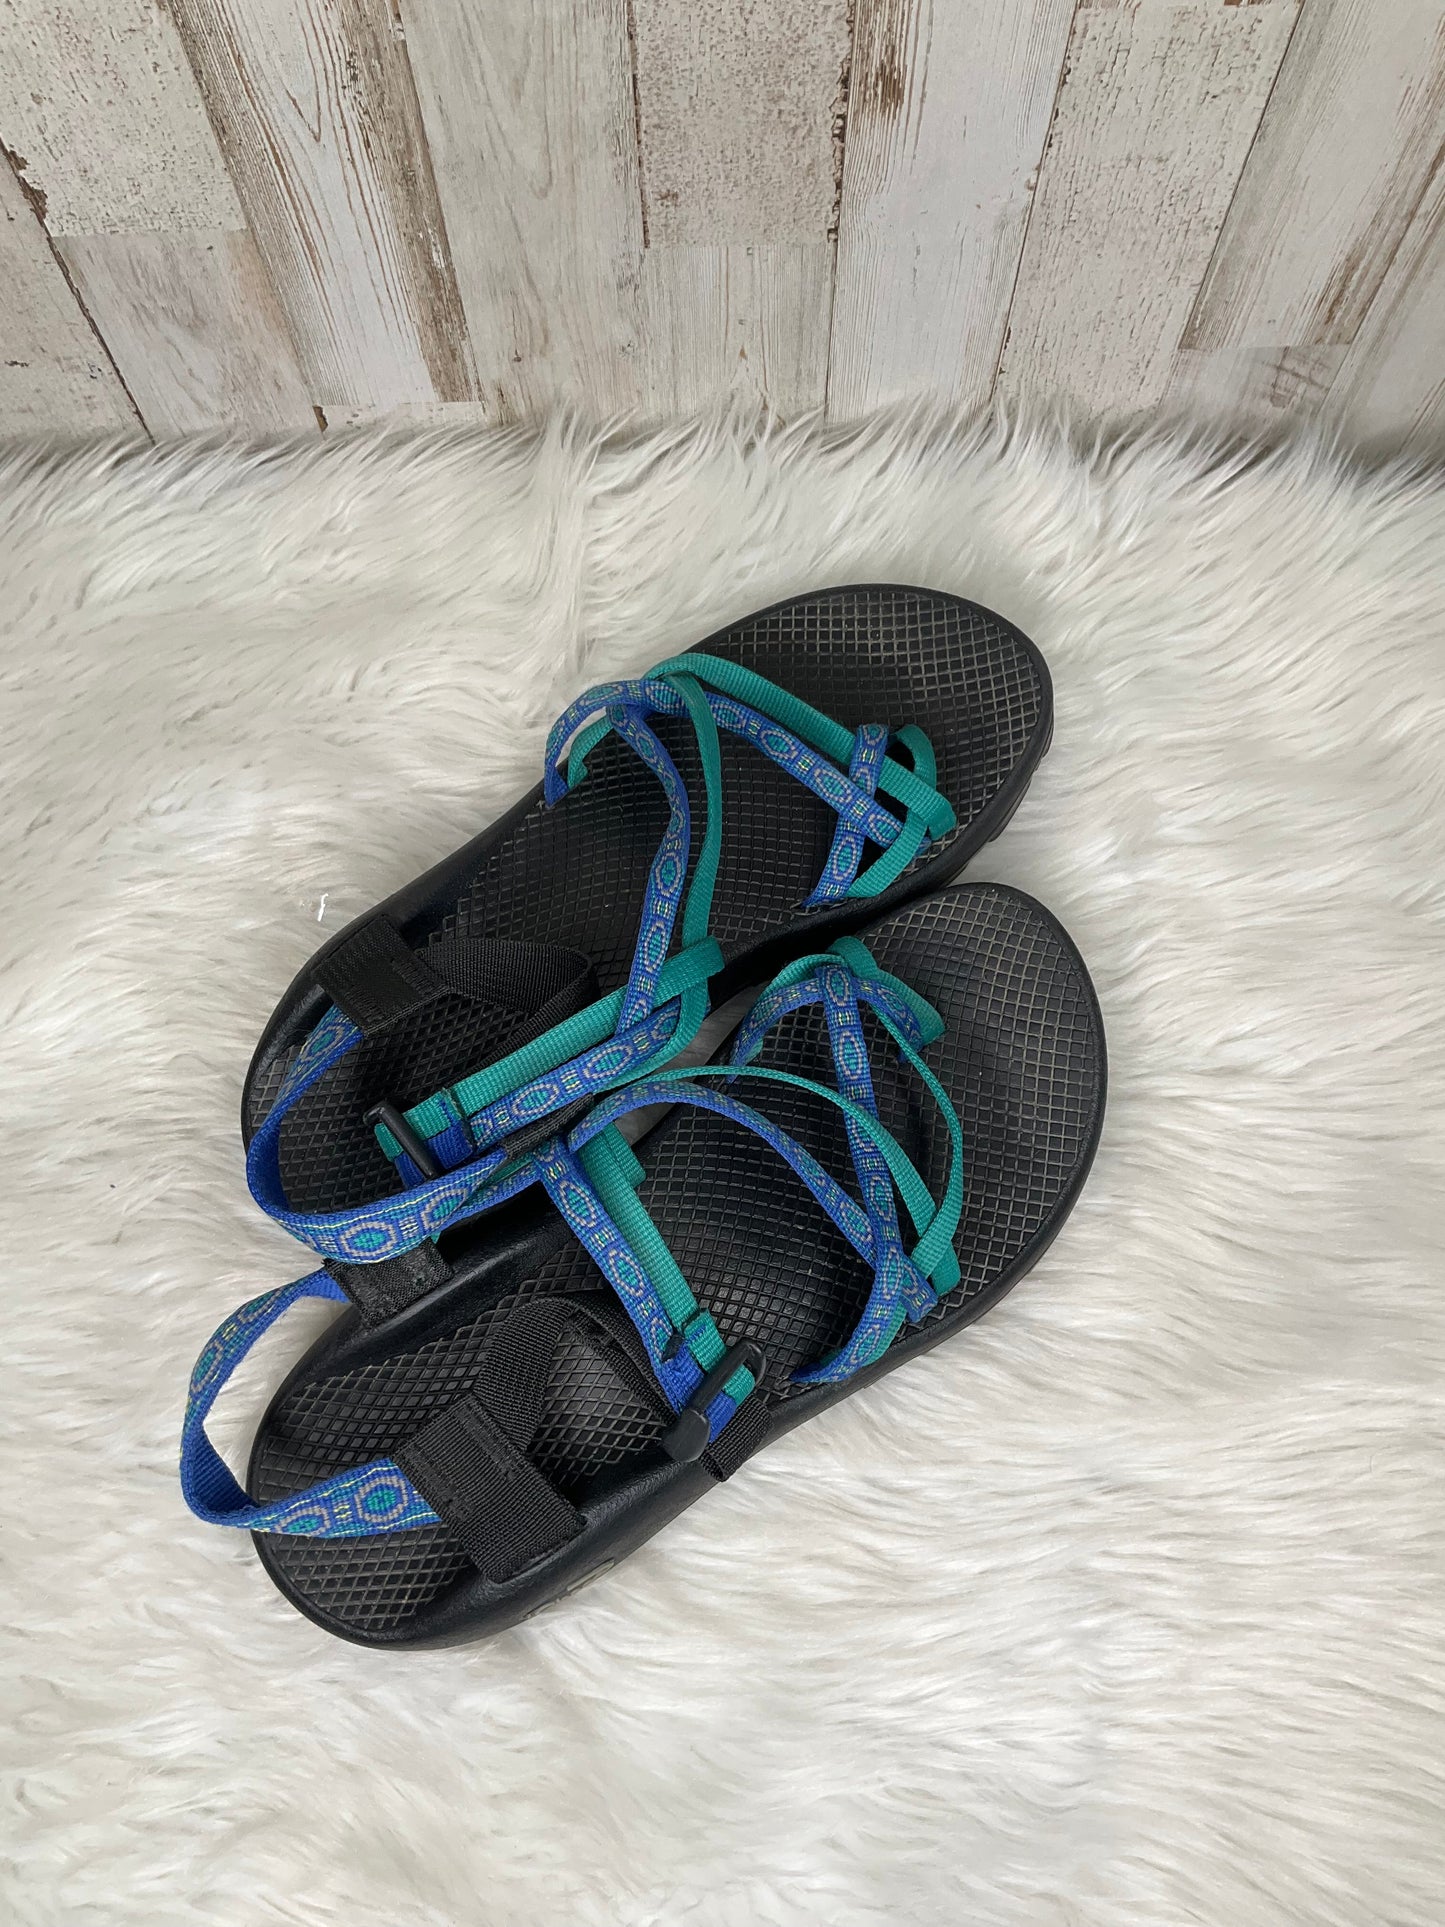 Sandals Flip Flops By Chacos  Size: 10